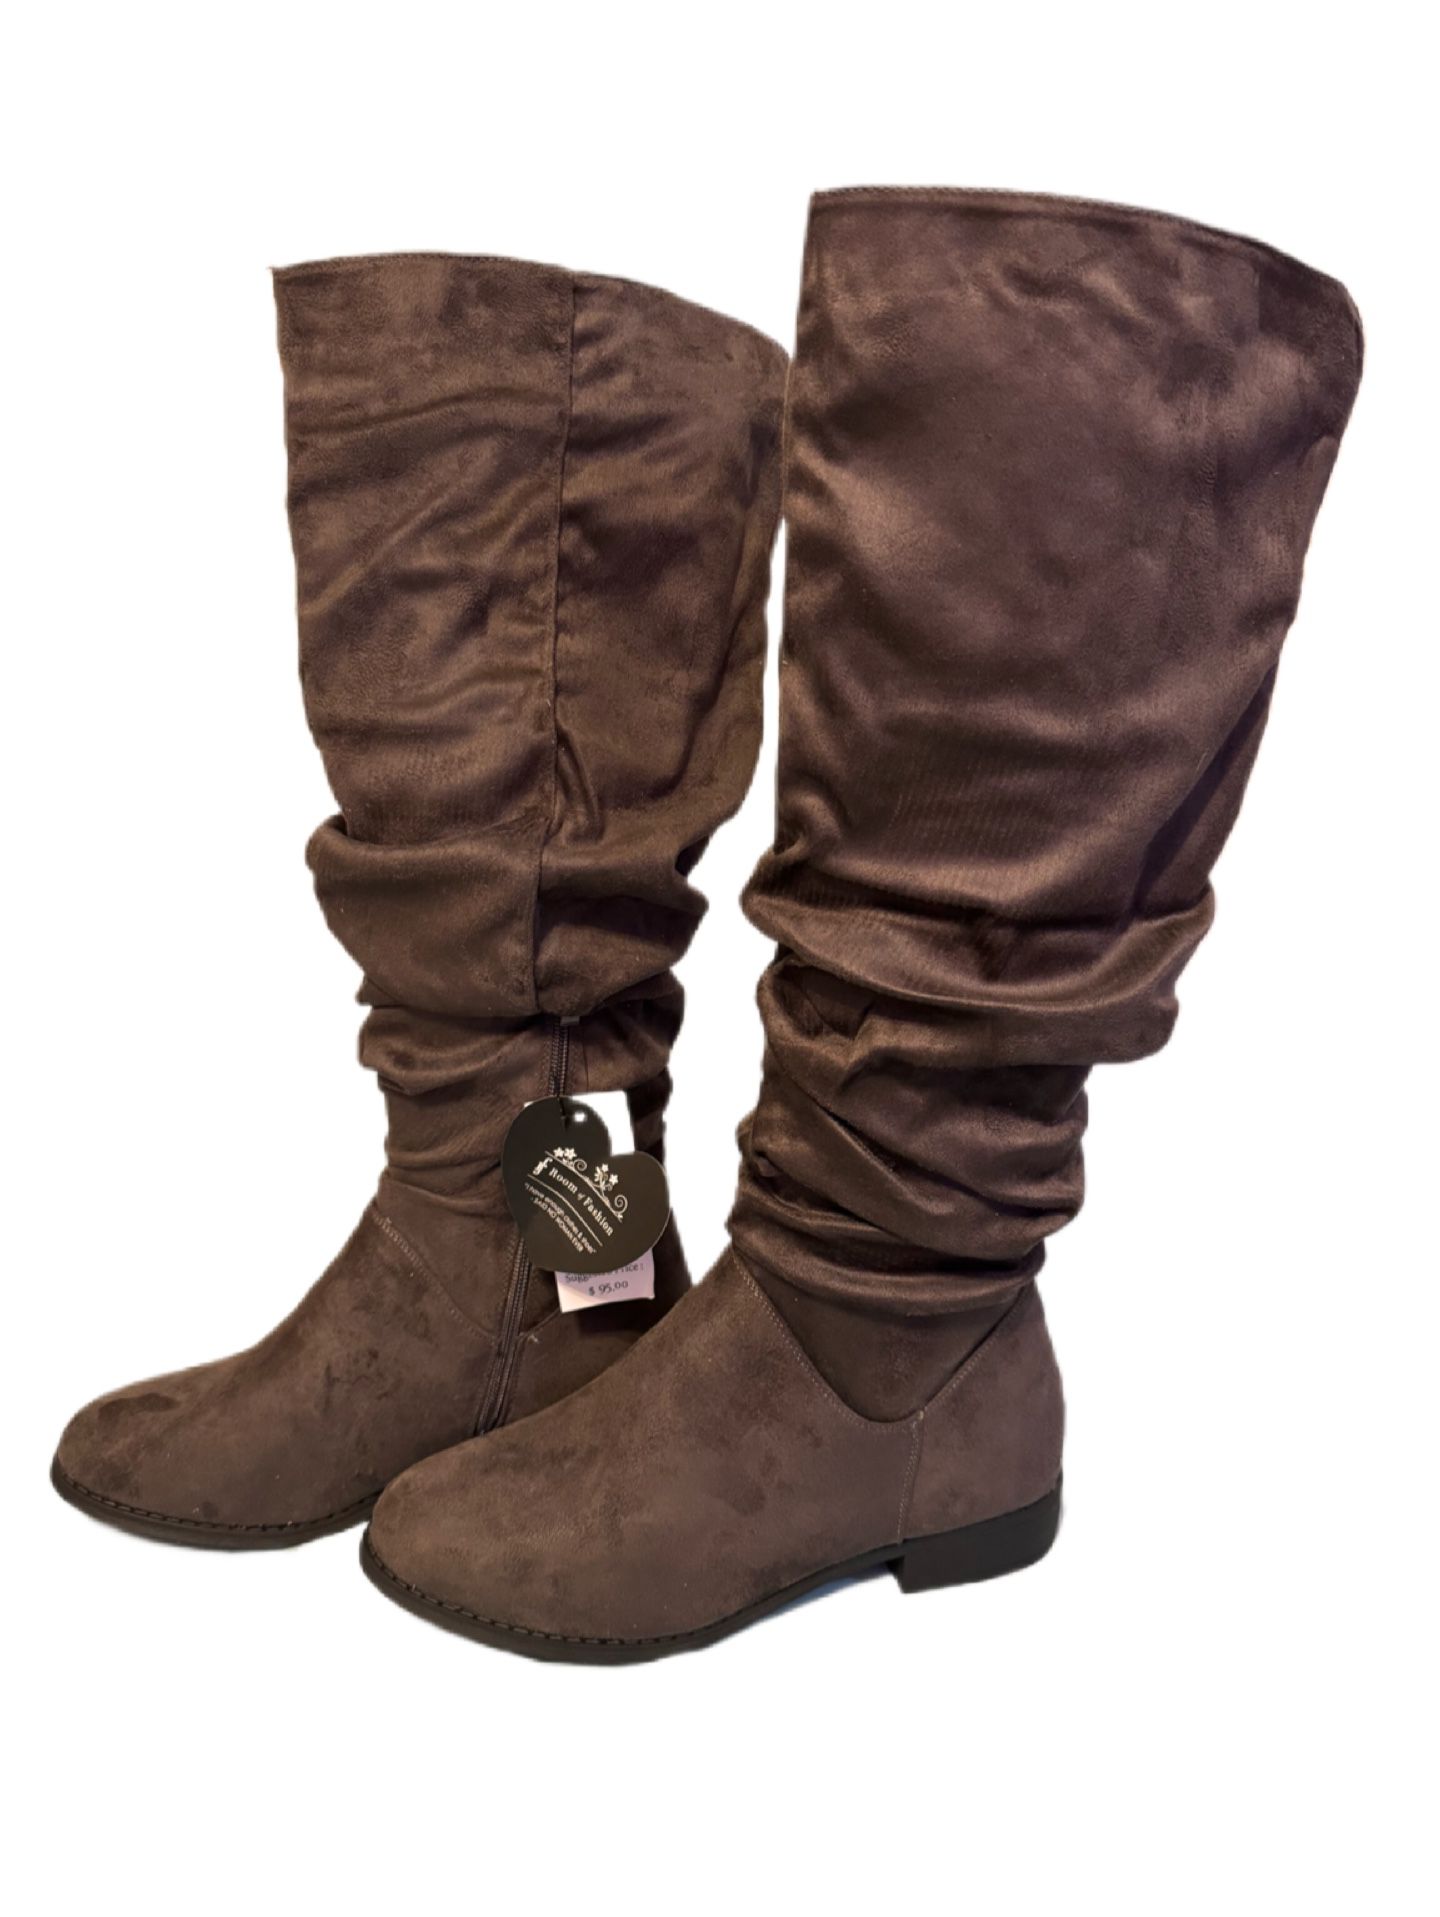 Women’s wide Calf Stretchy Slouchy Suede Boots 